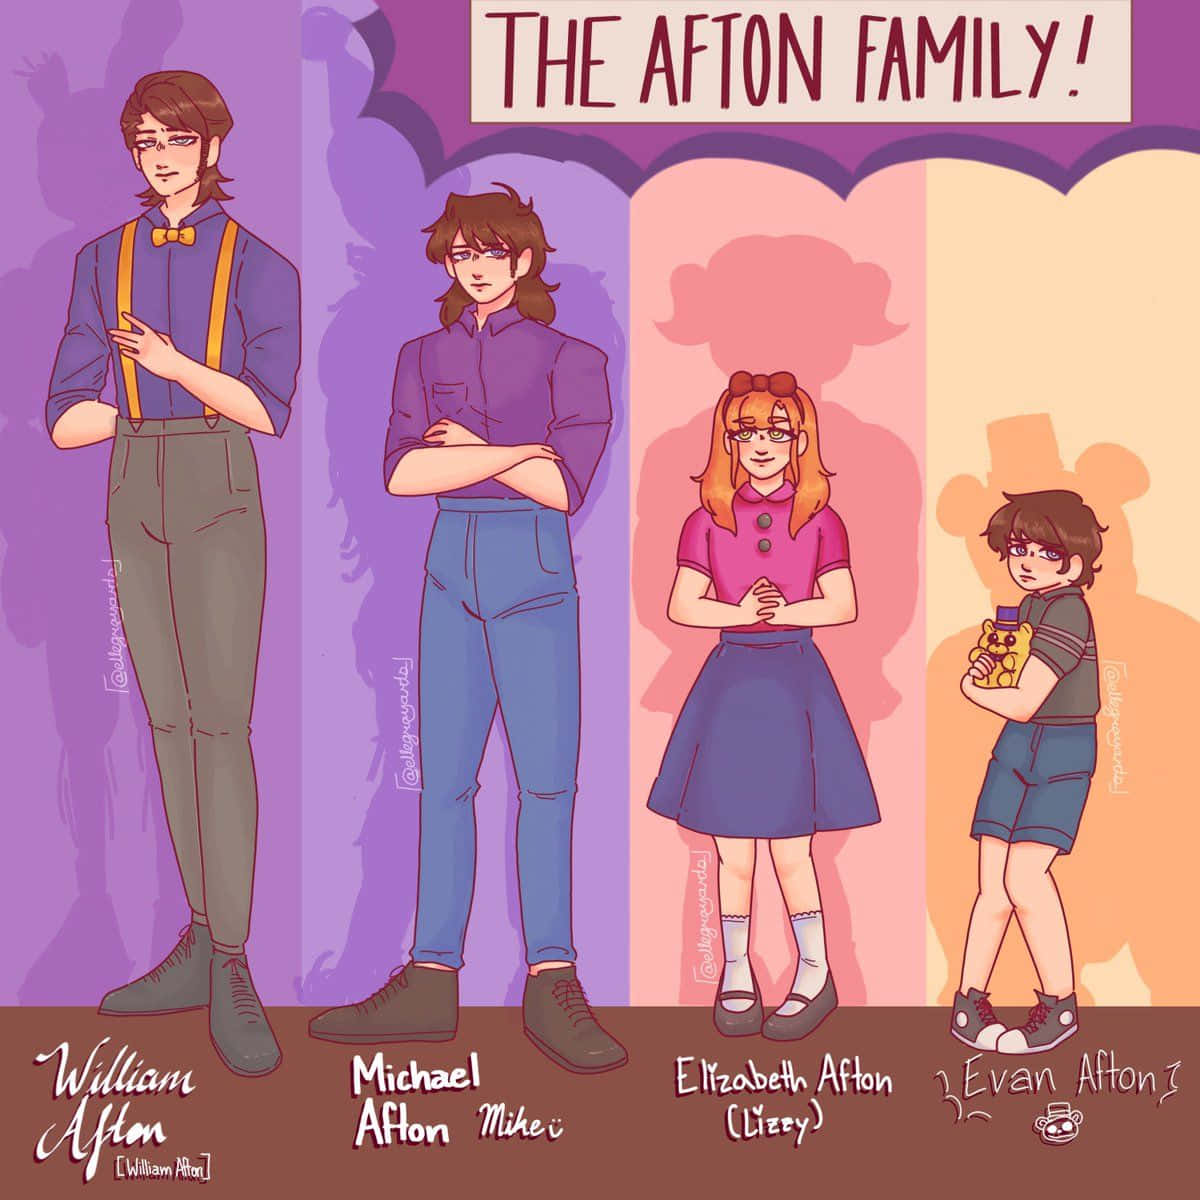 Welcome to the Afton Family!